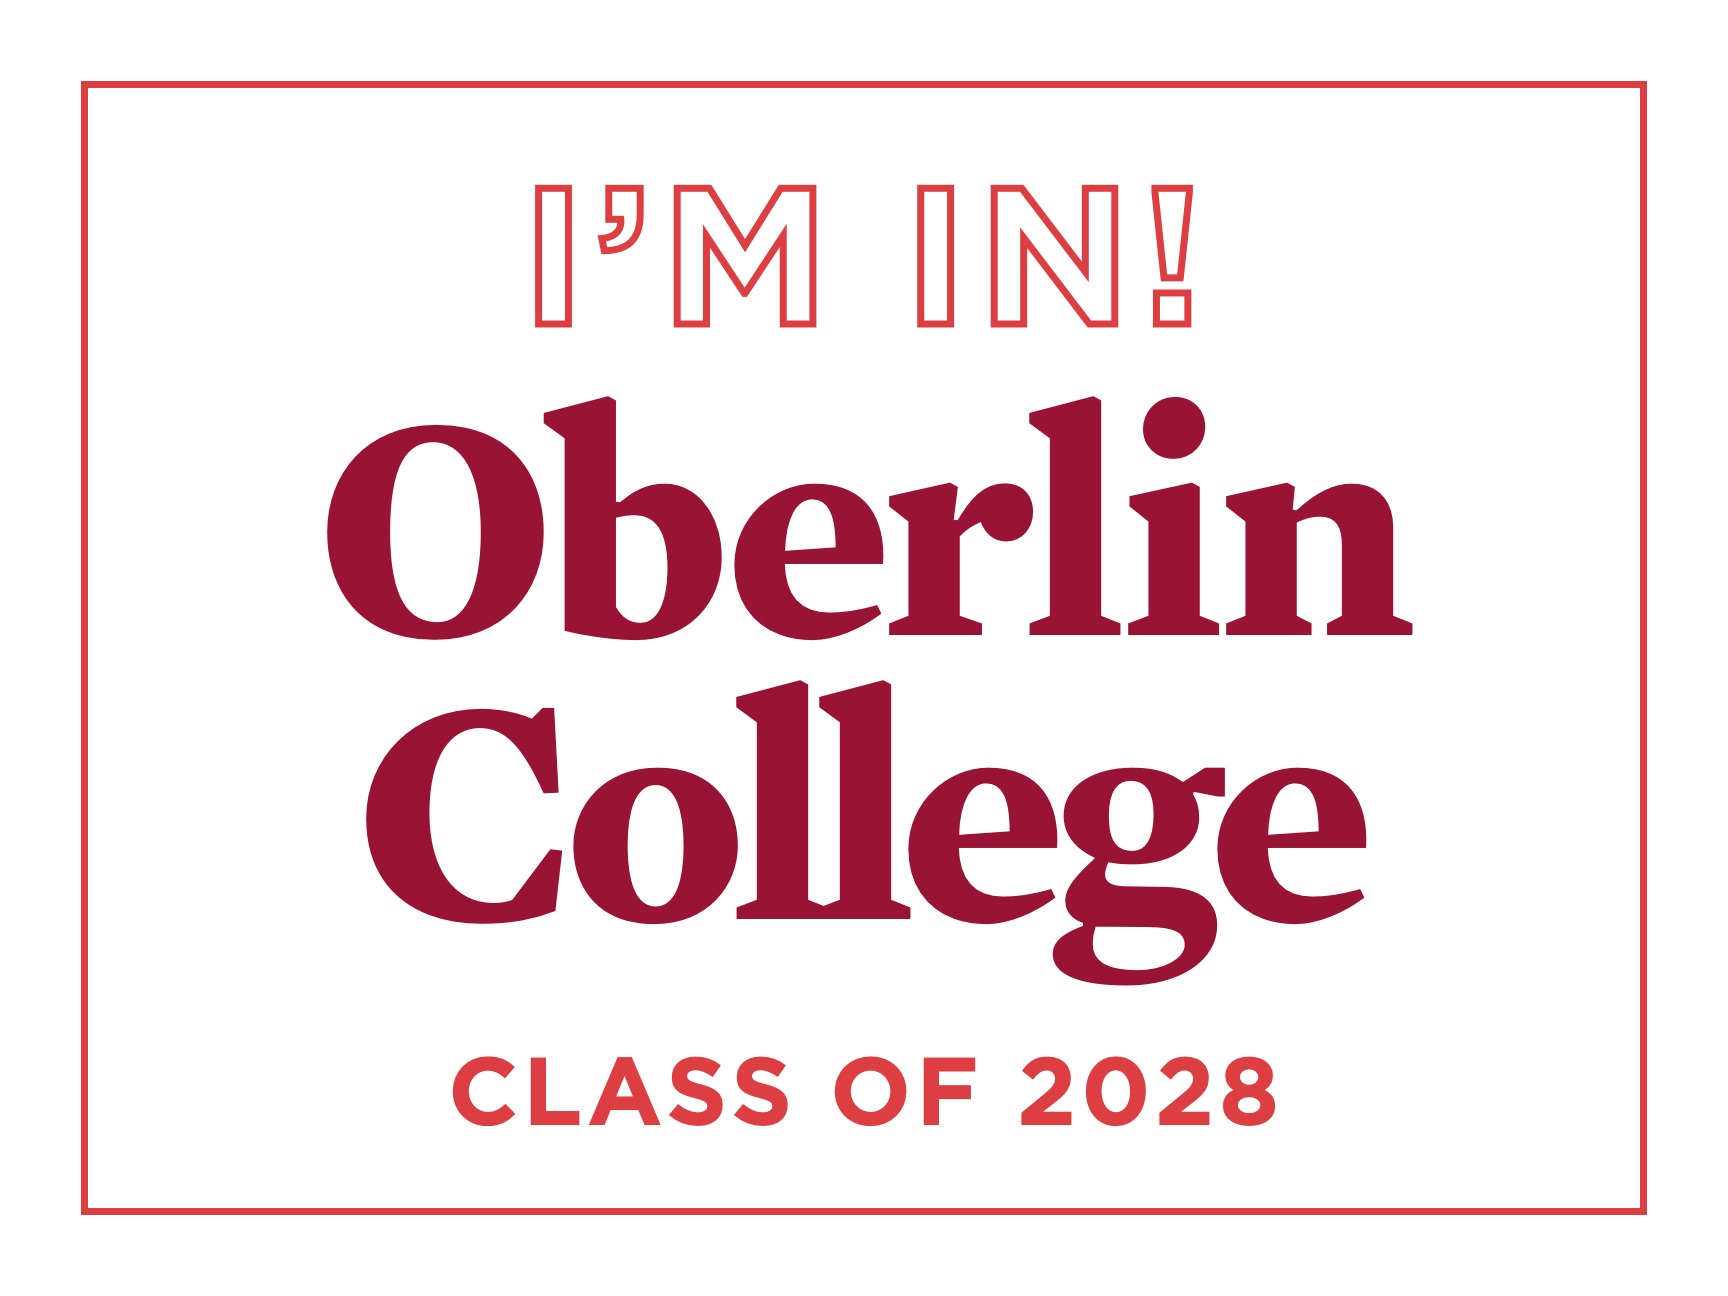 I'm in! Oberlin College Class of 2028 on white background.